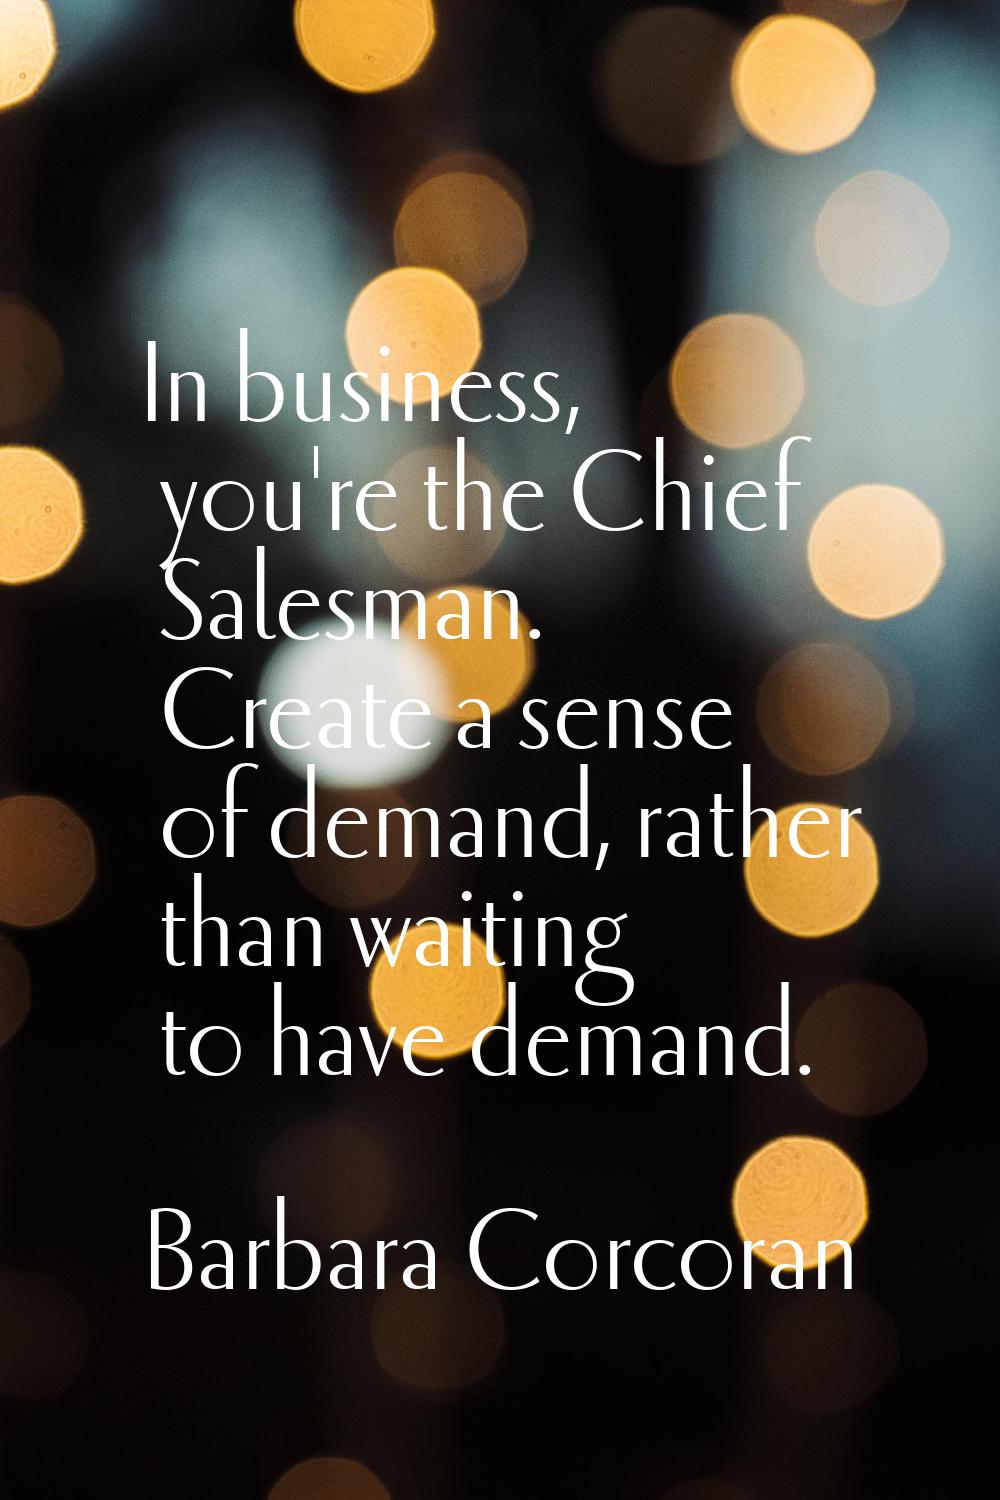 In business, you're the Chief Salesman. Create a sense of demand, rather than waiting to have deman